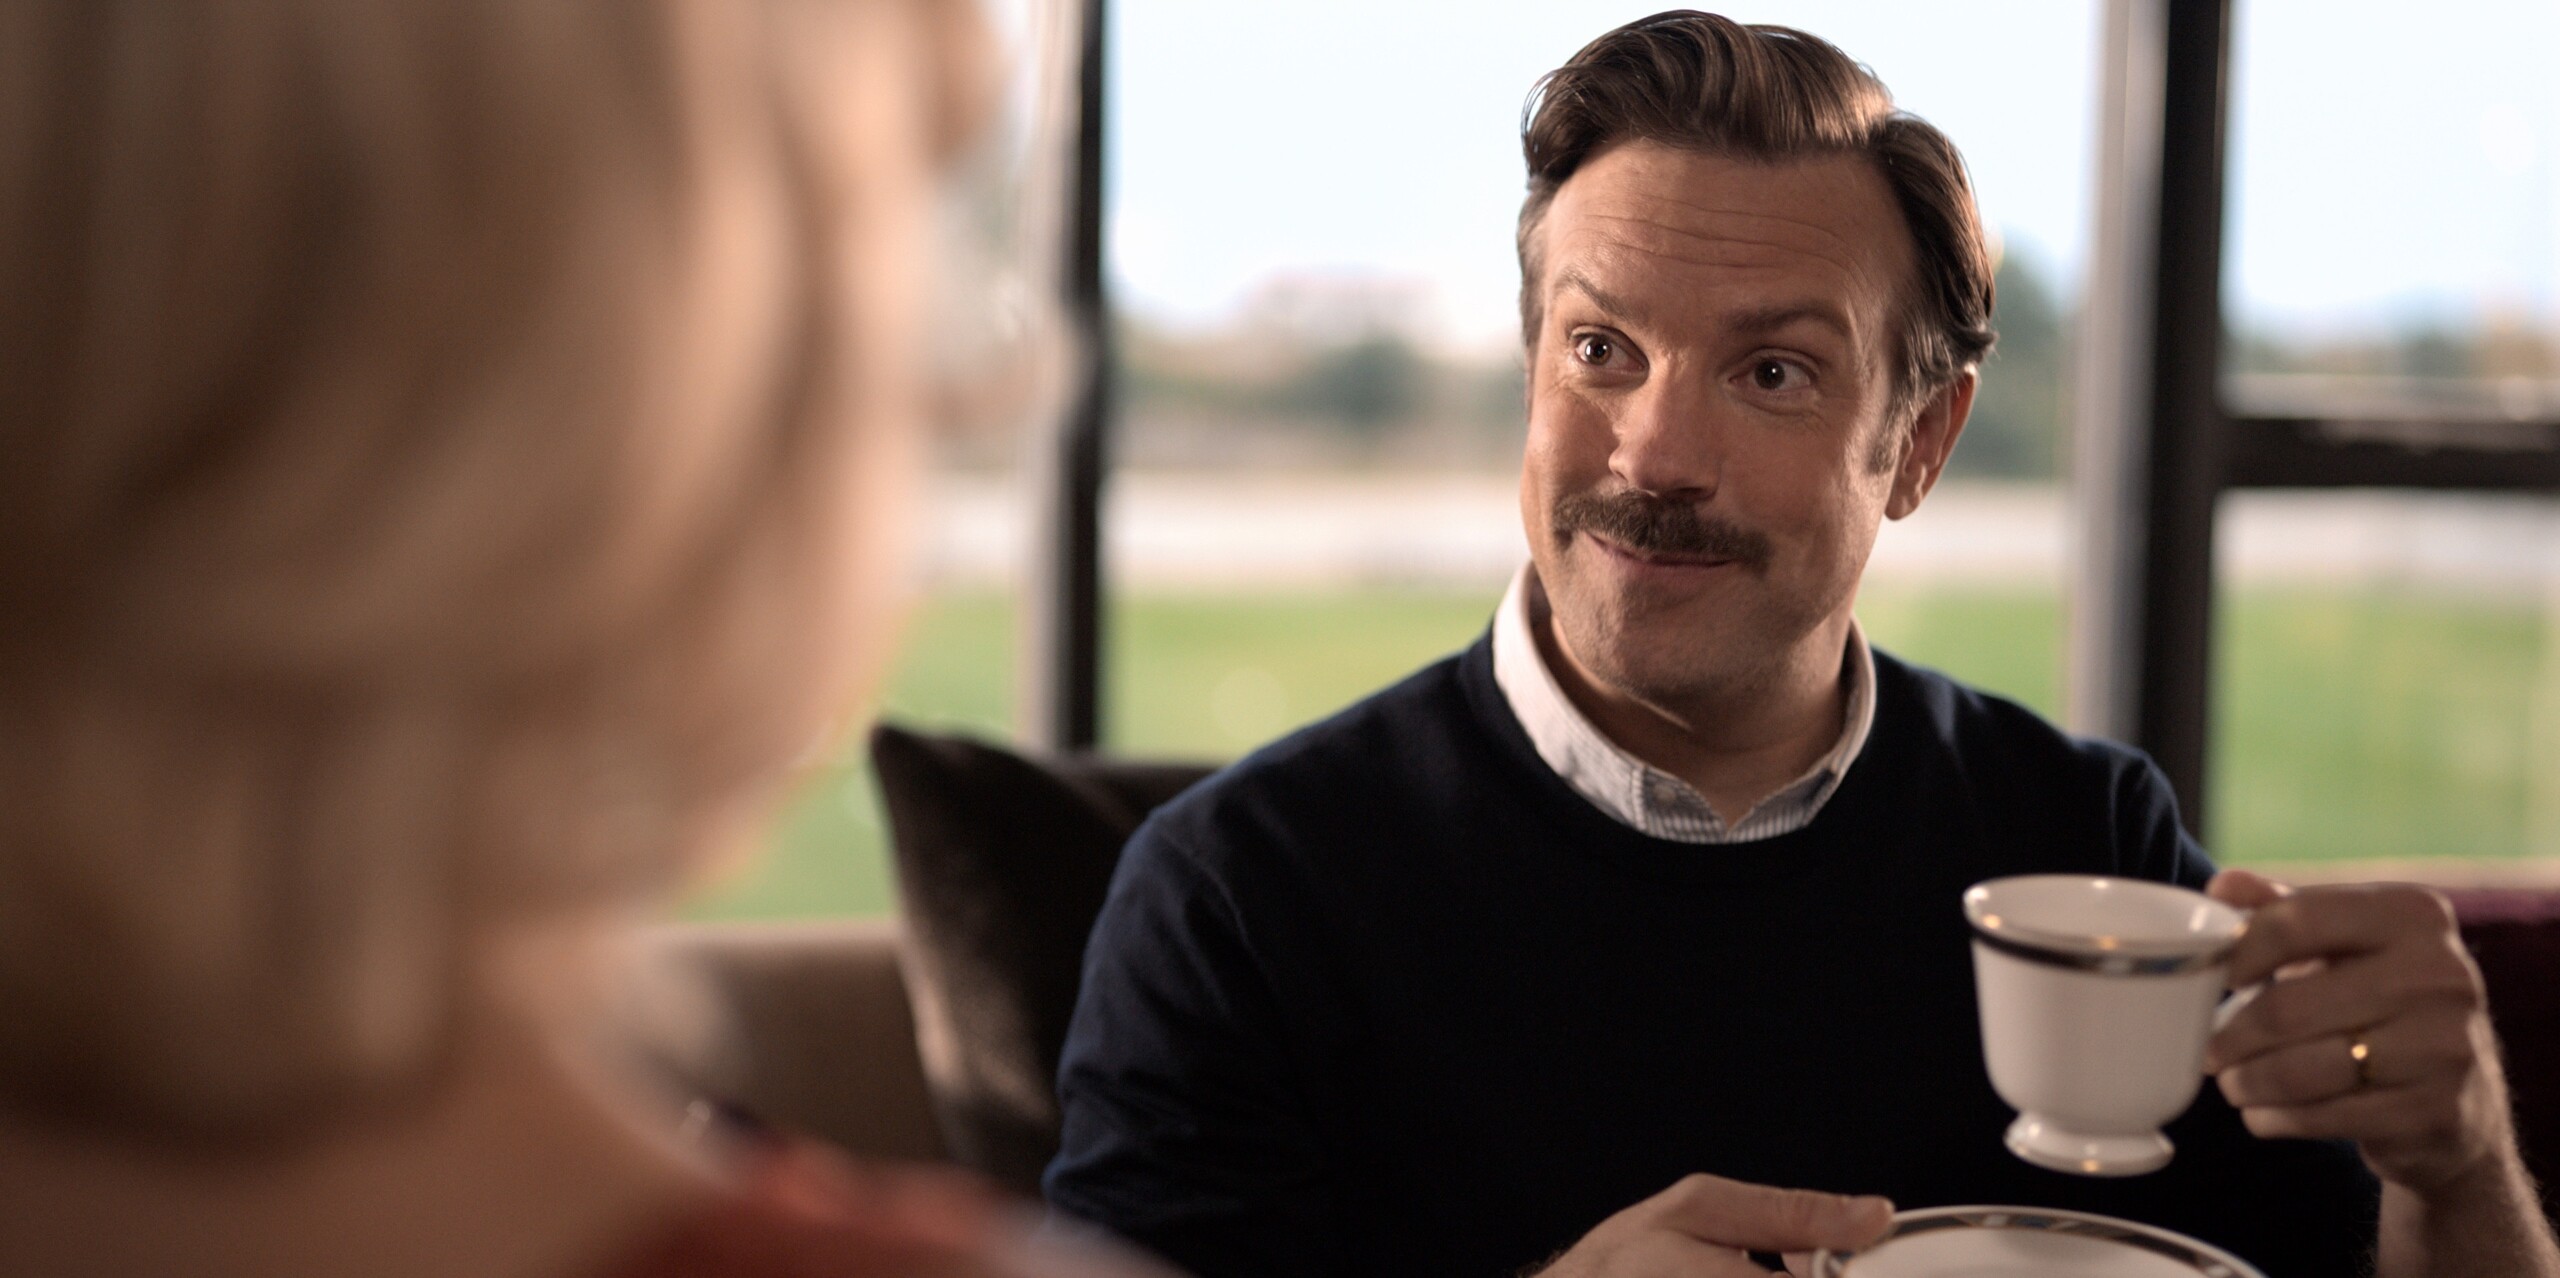 Ted Lasso: Jason Sudeikis, The show has won The AARP Movies for Grownups Award for Best TV Series in 2022. 2560x1280 Dual Screen Background.